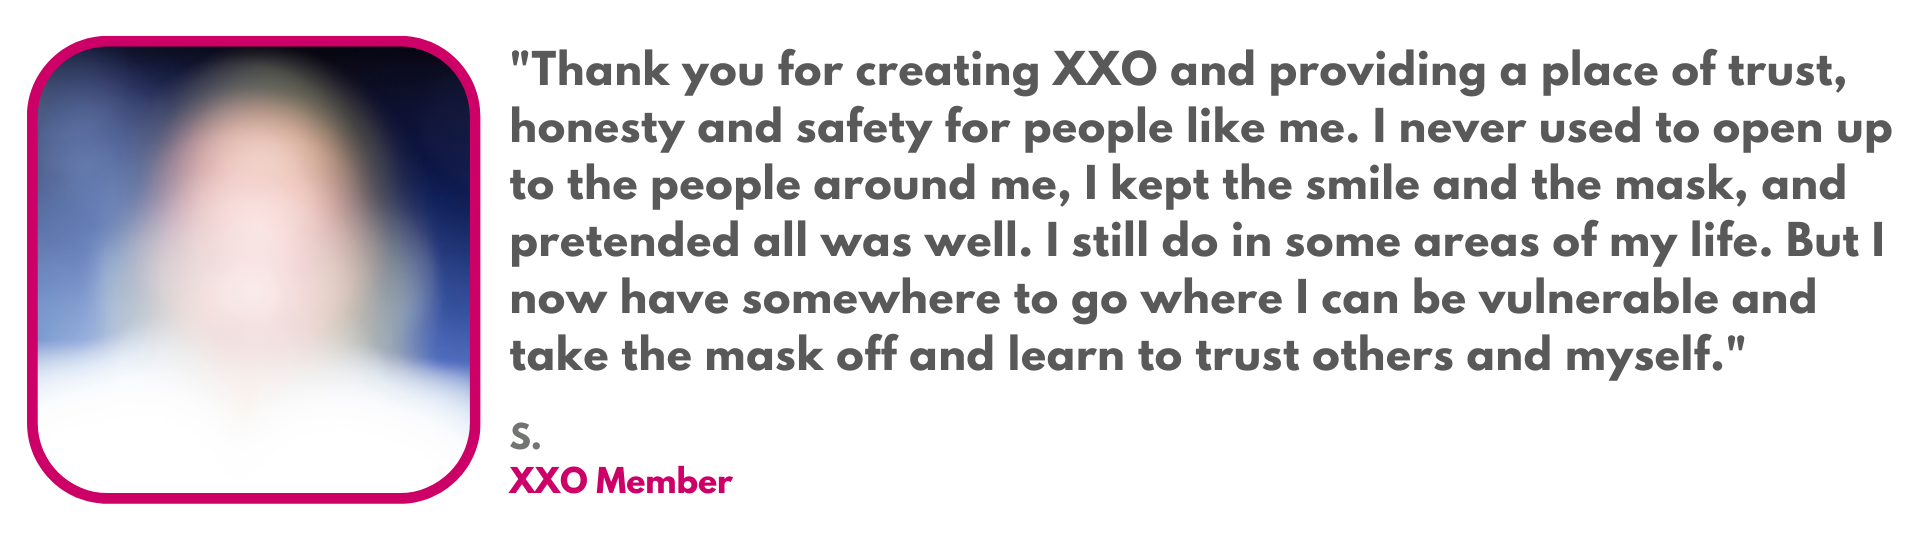 XXO CONNECT STORIES TESTIMONIALS 8.png